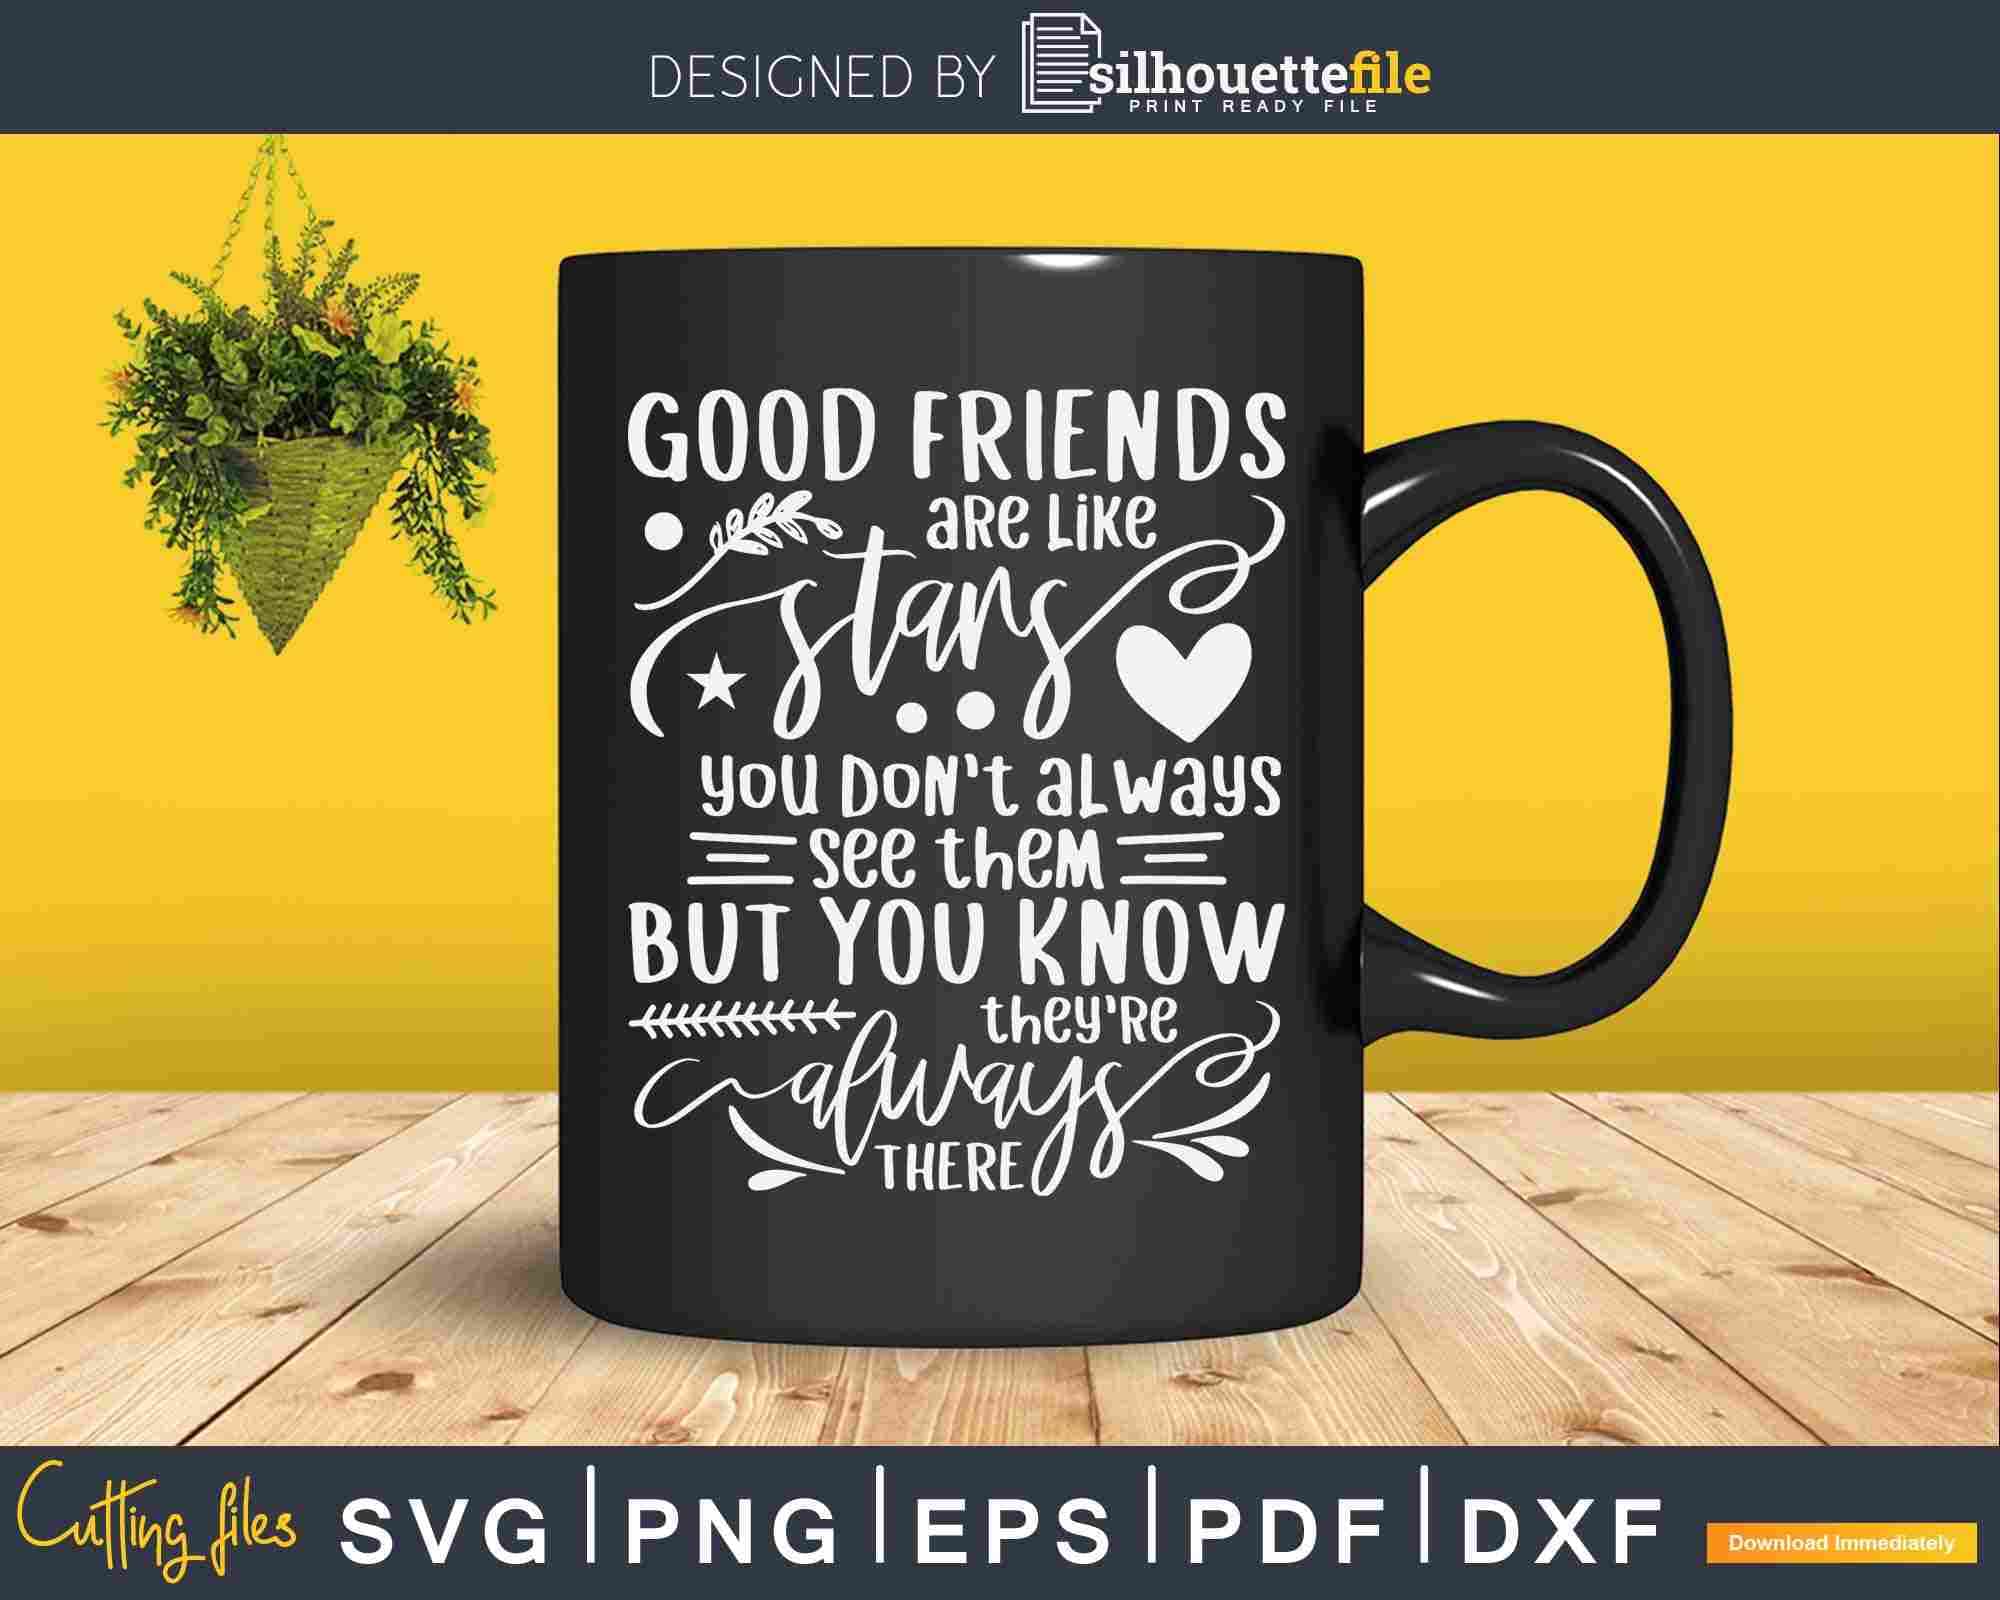 https://cdn.shopify.com/s/files/1/0356/6554/3307/products/good-friends-are-like-stars-svg-cut-files-silhouettefile-249.jpg